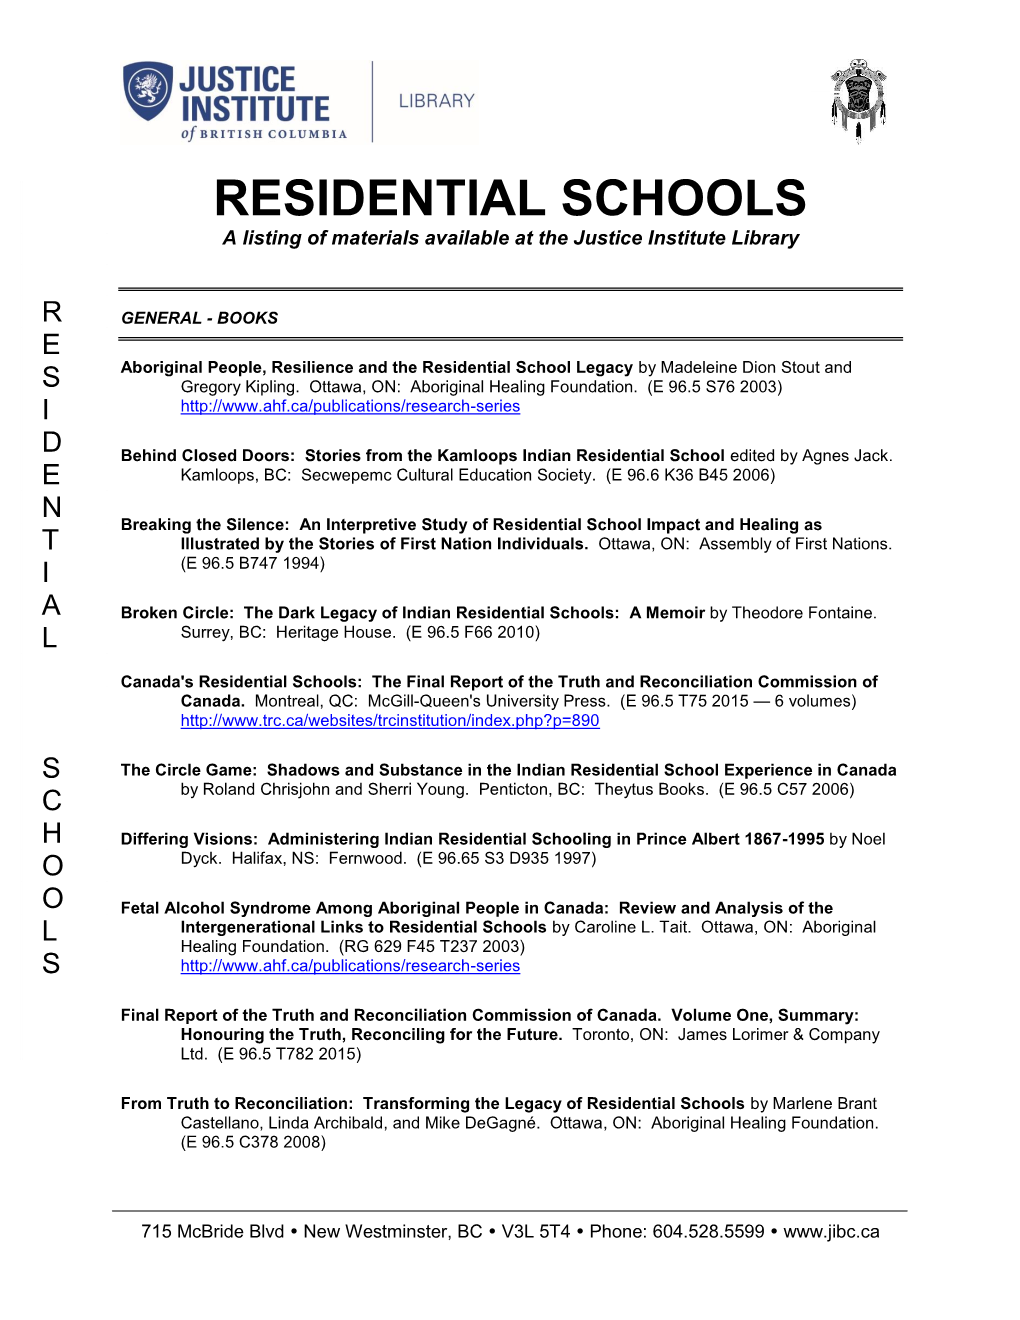 RESIDENTIAL SCHOOLS a Listing of Materials Available at the Justice Institute Library